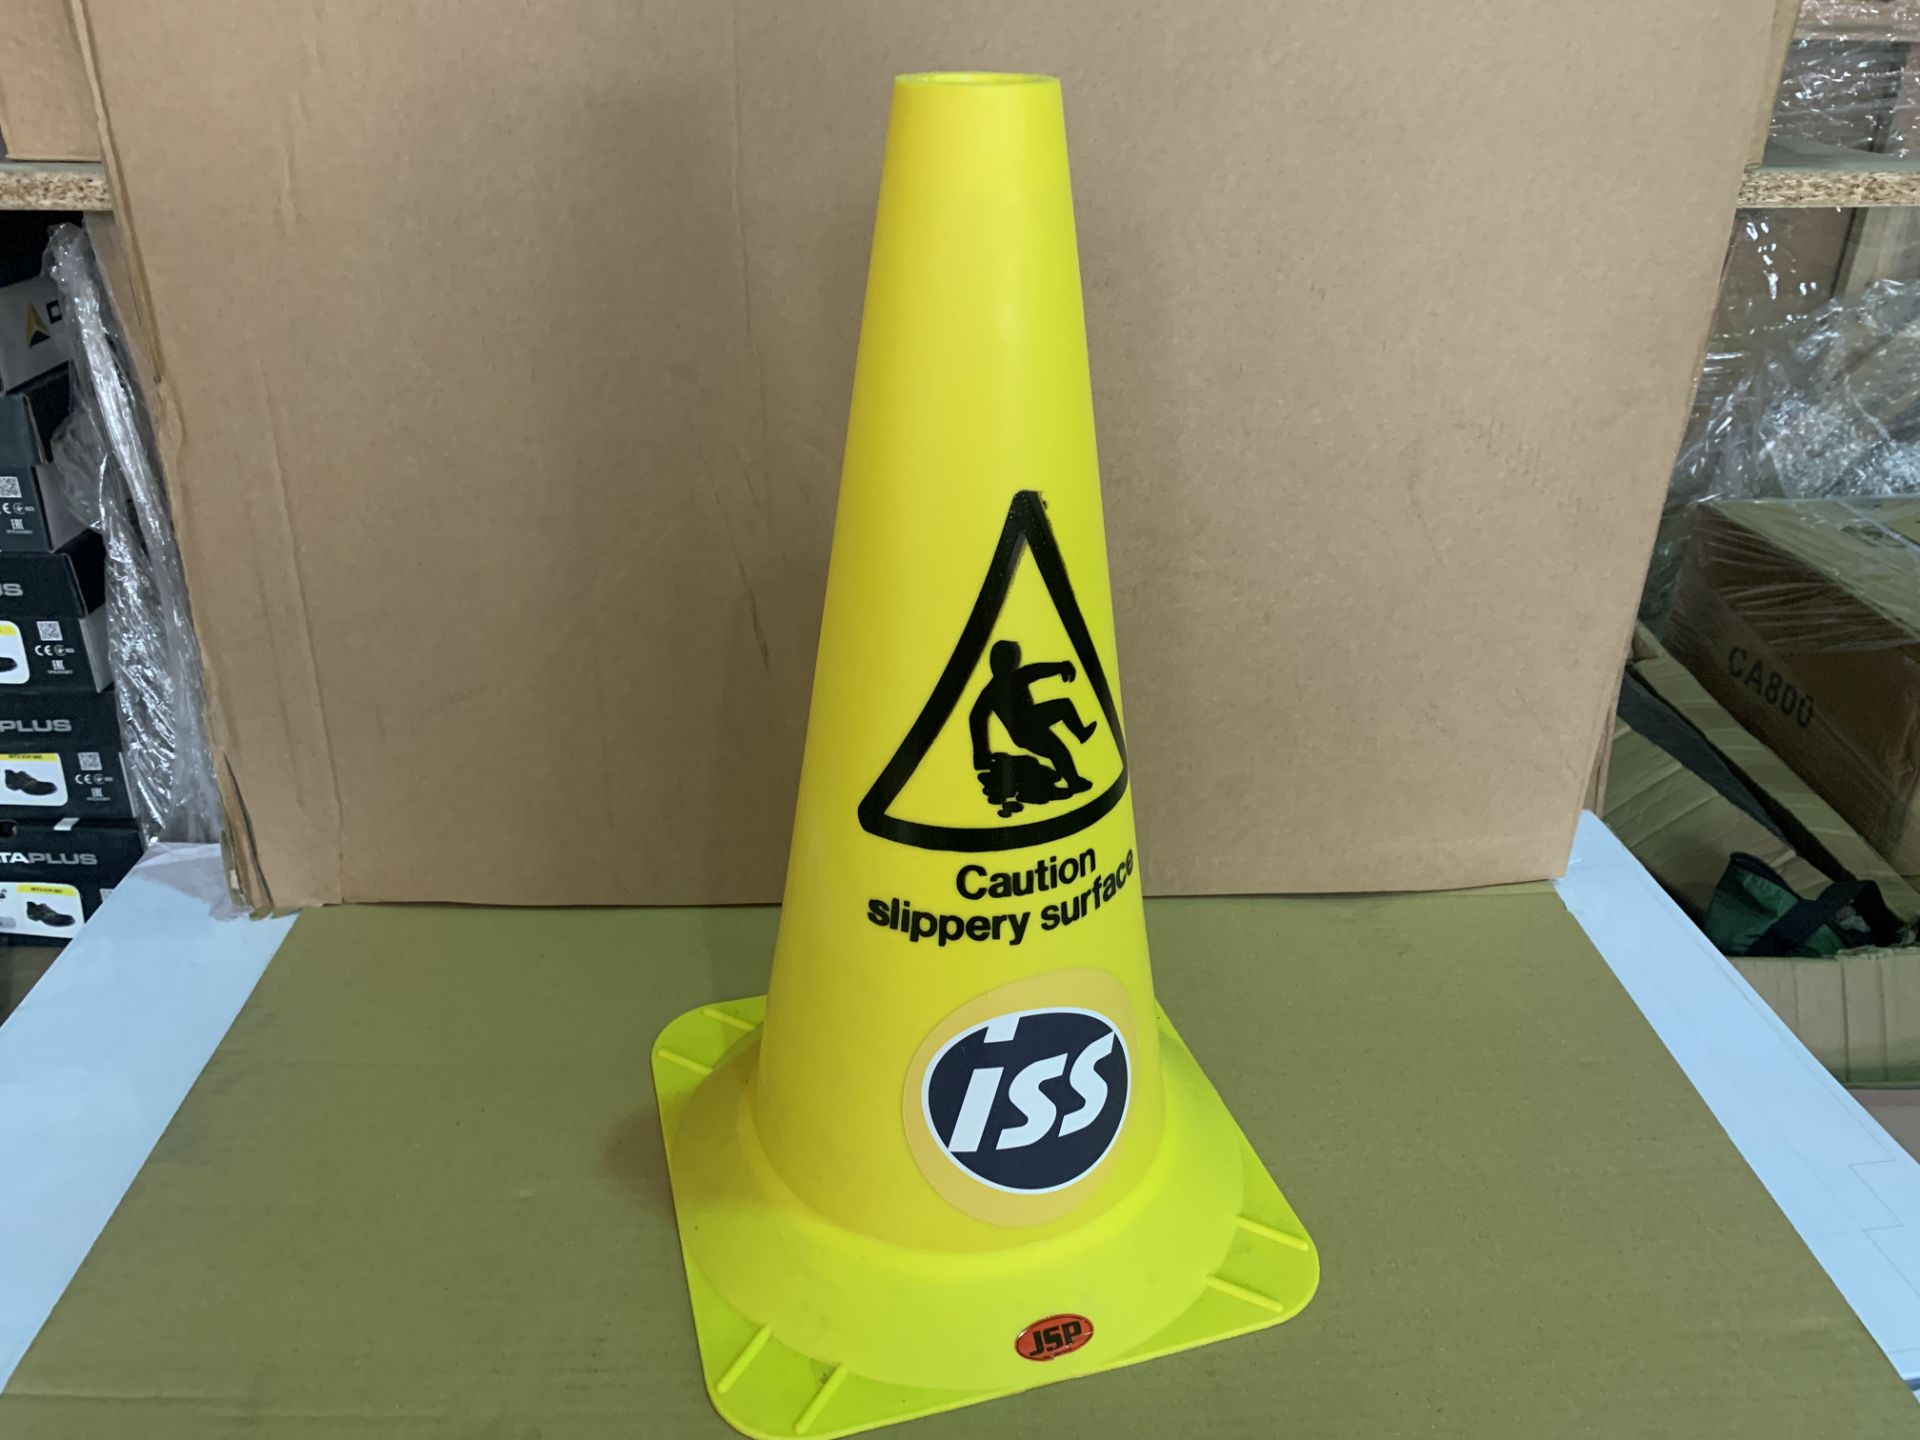 25 X BRAND NEW CAUTION SLIPPERY SURFACE CONES R15